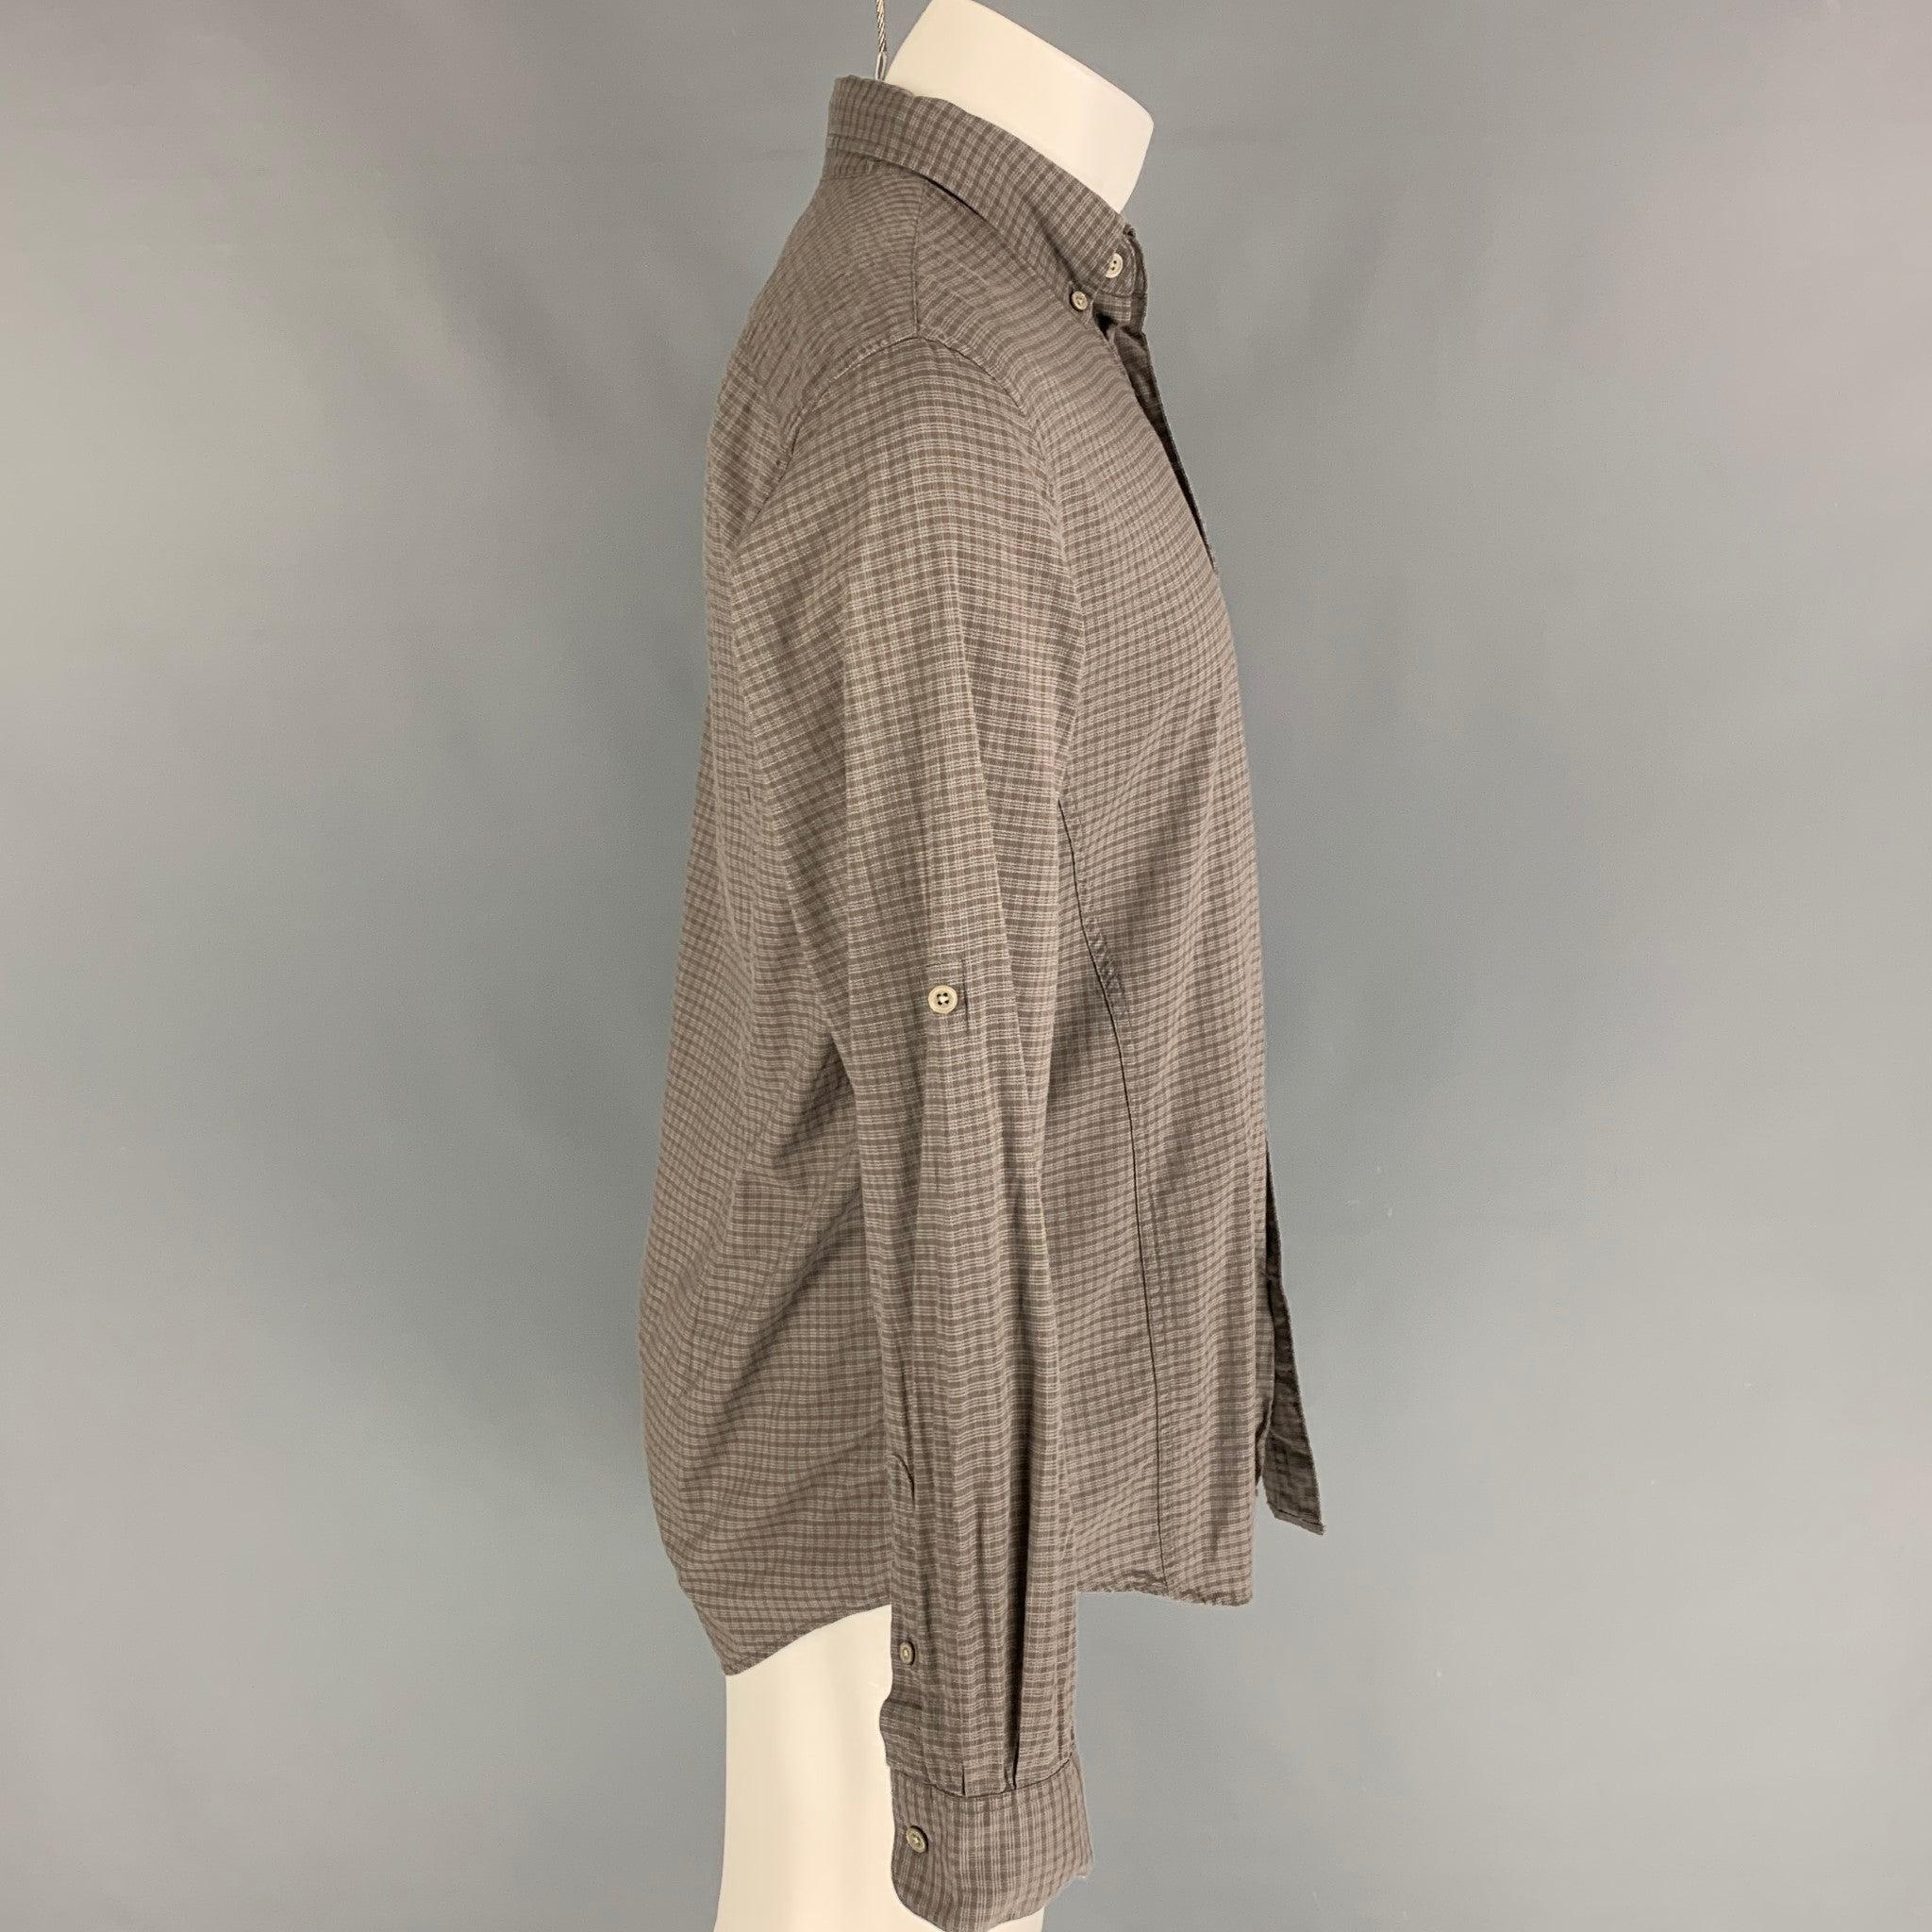 JOHN VARVATOS long sleeve shirt comes in a brown checkered cotton featuring a button down closure, patch pocket, and a button up closure.
Very Good
Pre-Owned Condition. 

Marked:   M  

Measurements: 
 
Shoulder: 18 inches  Chest: 40 inches  Sleeve: